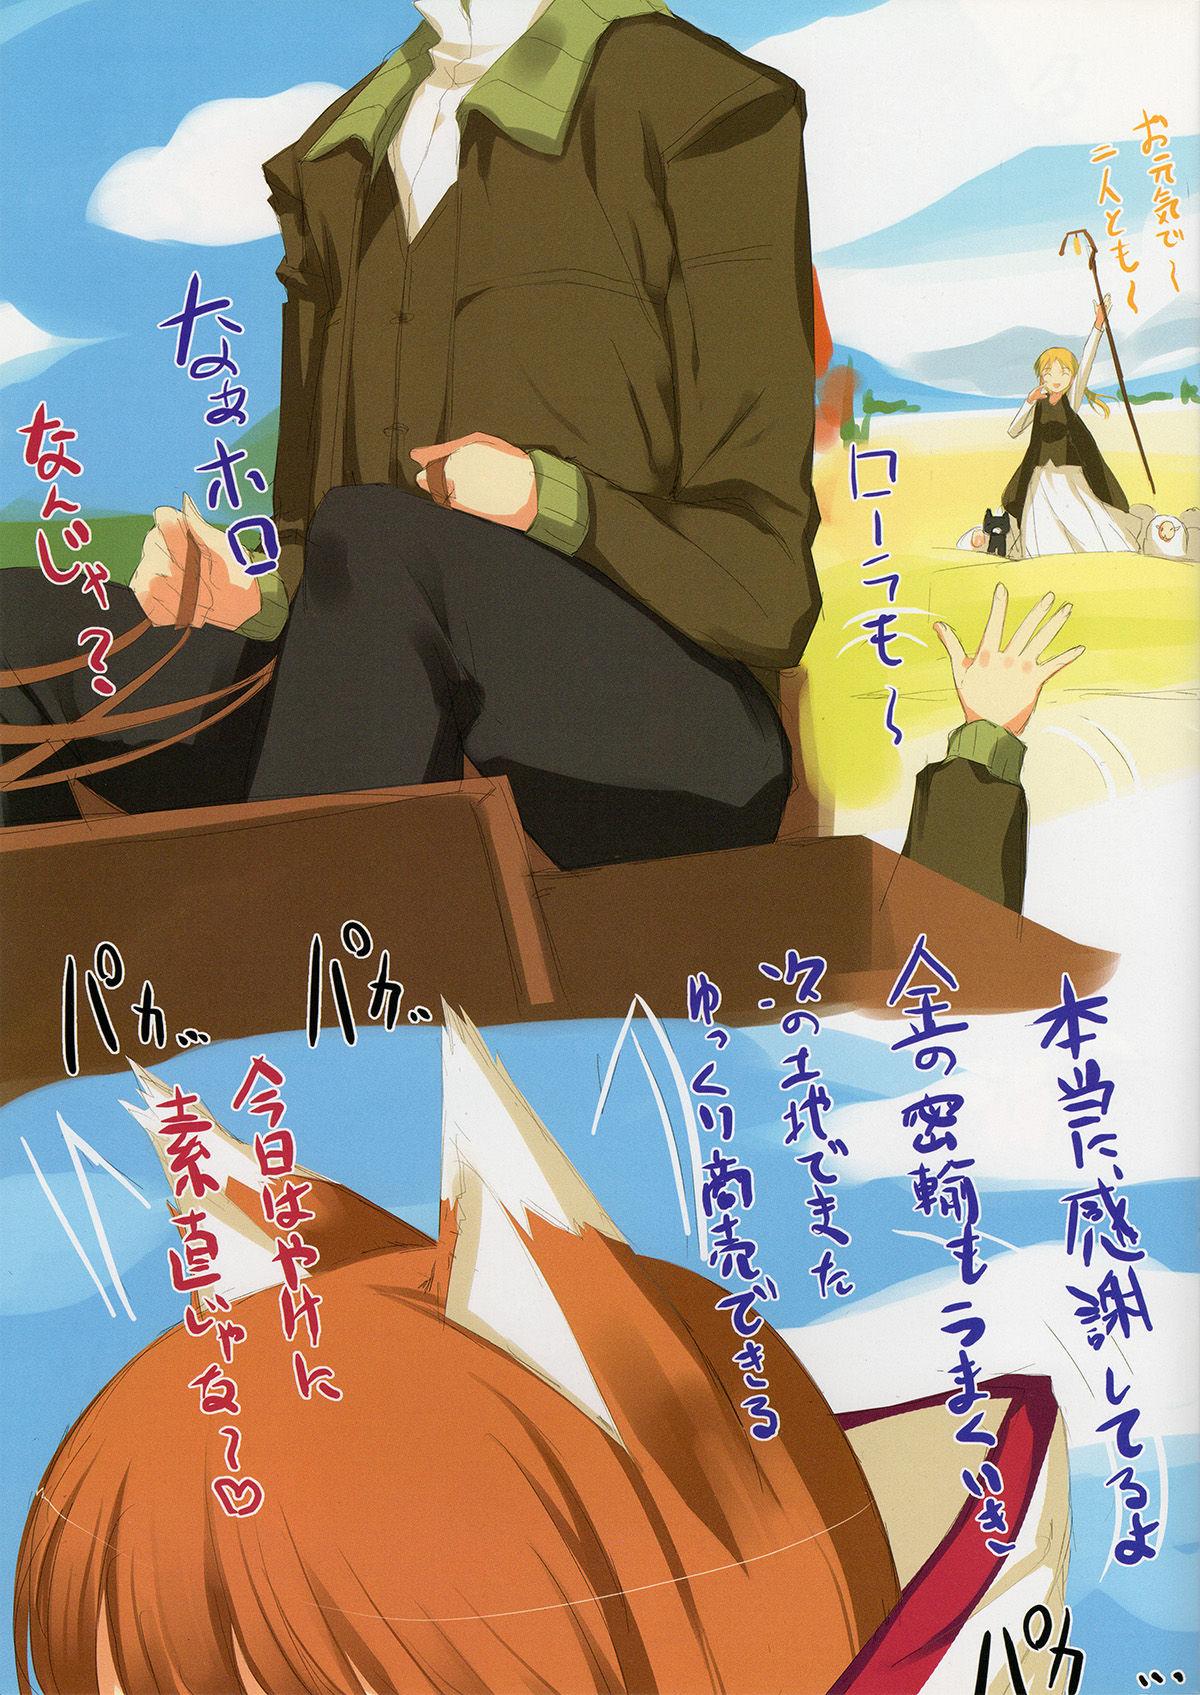 Mmd Ookami no Kimagure Hon - Spice and wolf Pure18 - Page 2